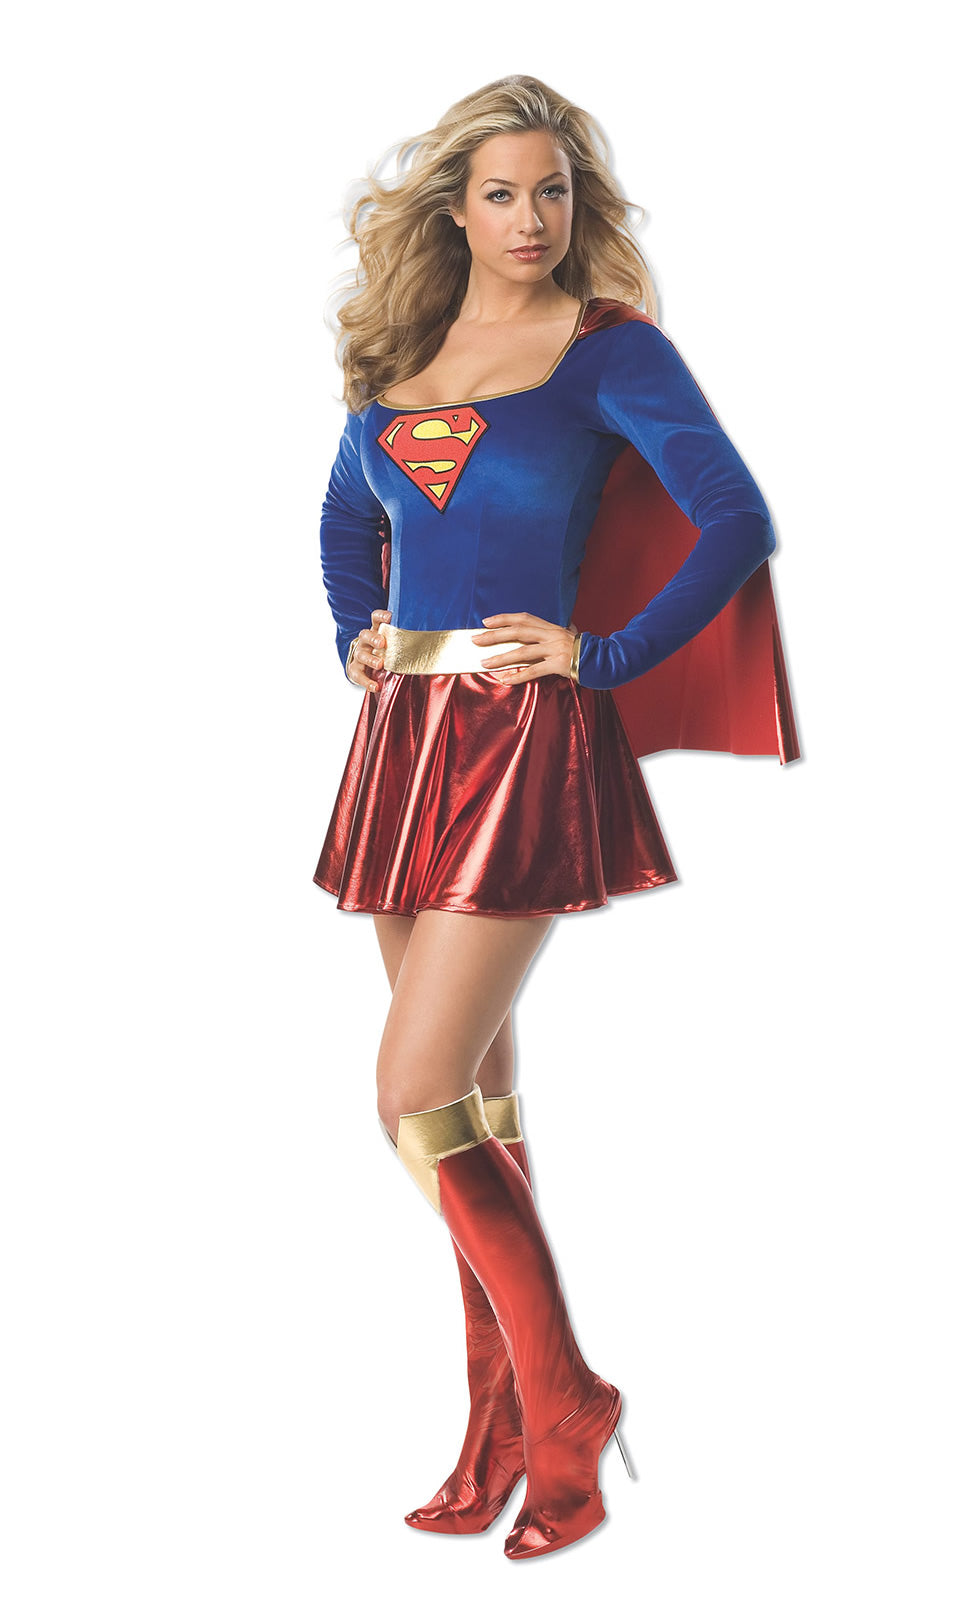 Short Supergirl costume with cape and boot covers